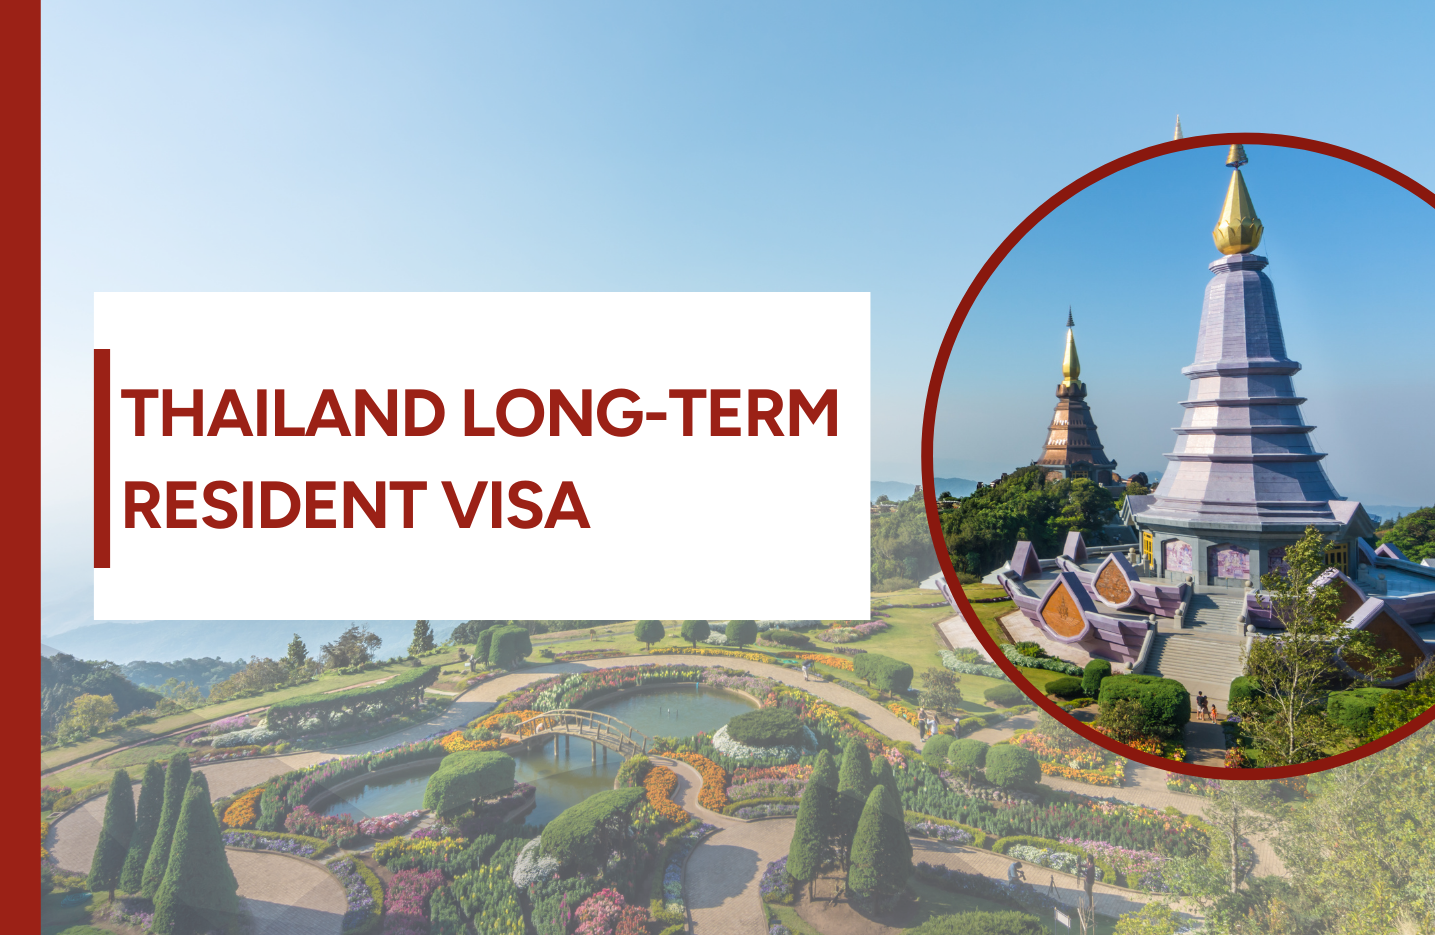 All the information you should know about a long-term resident visa for Thailand